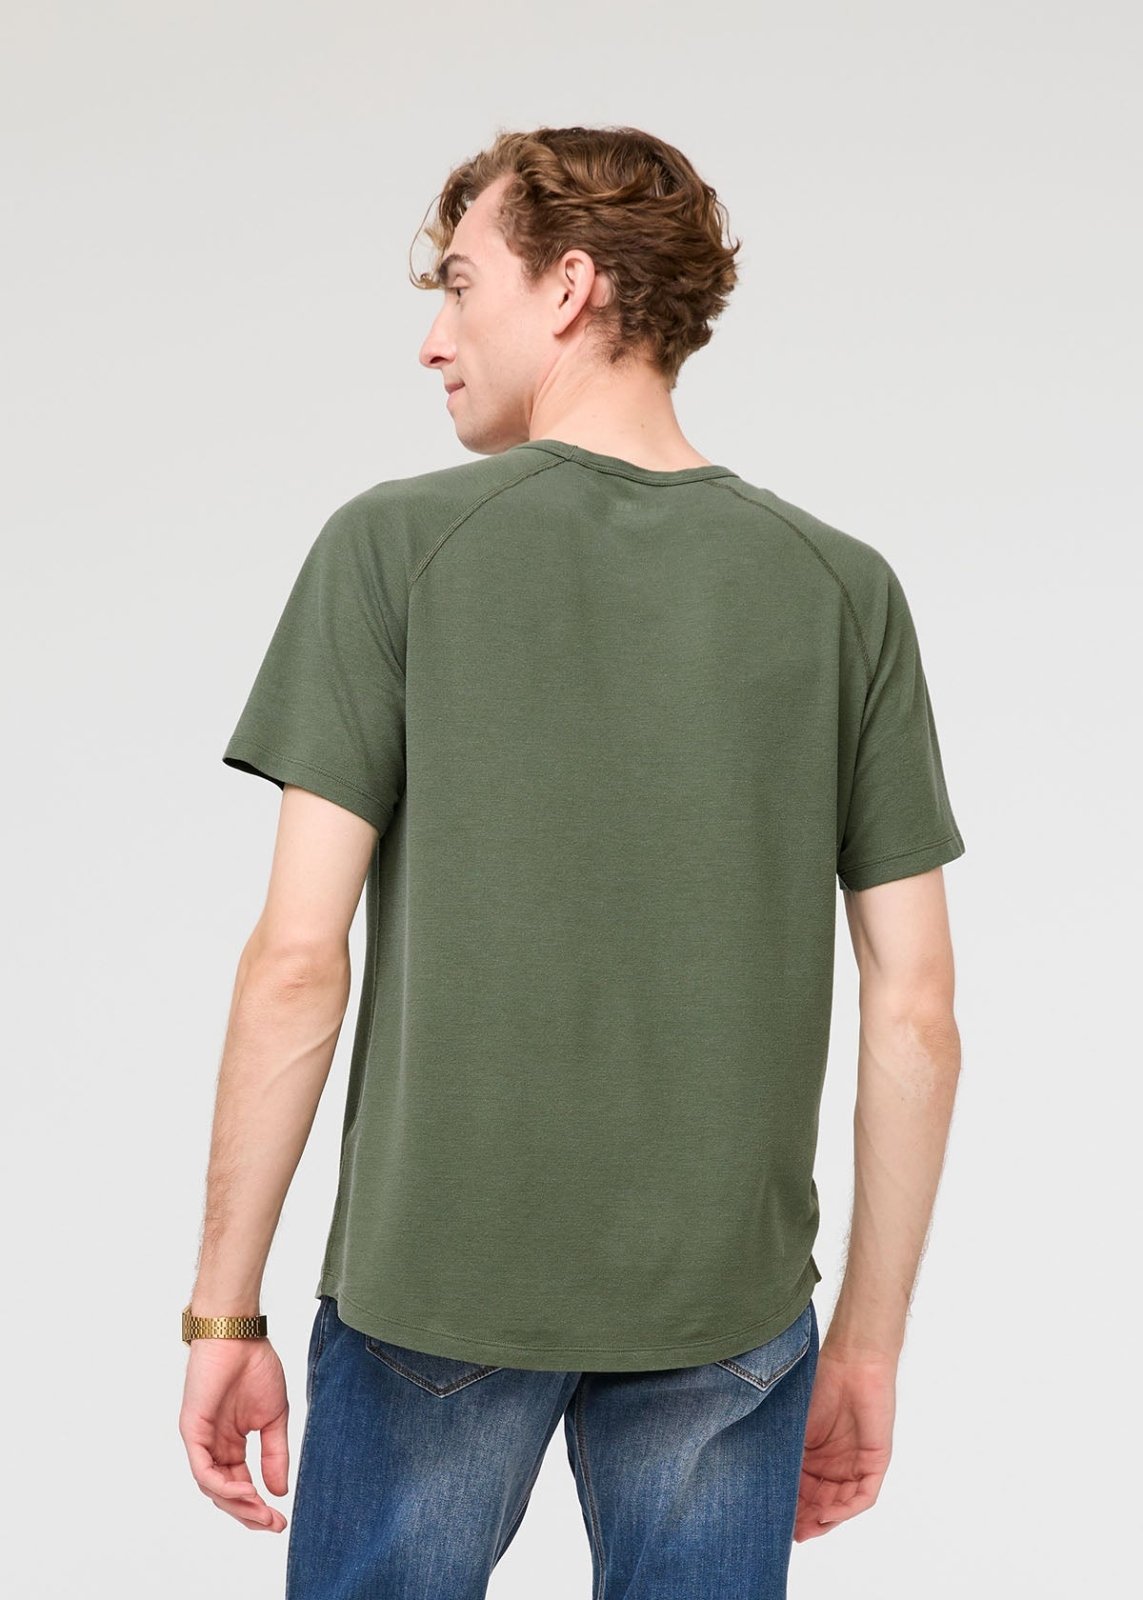 mens breathable green tee back